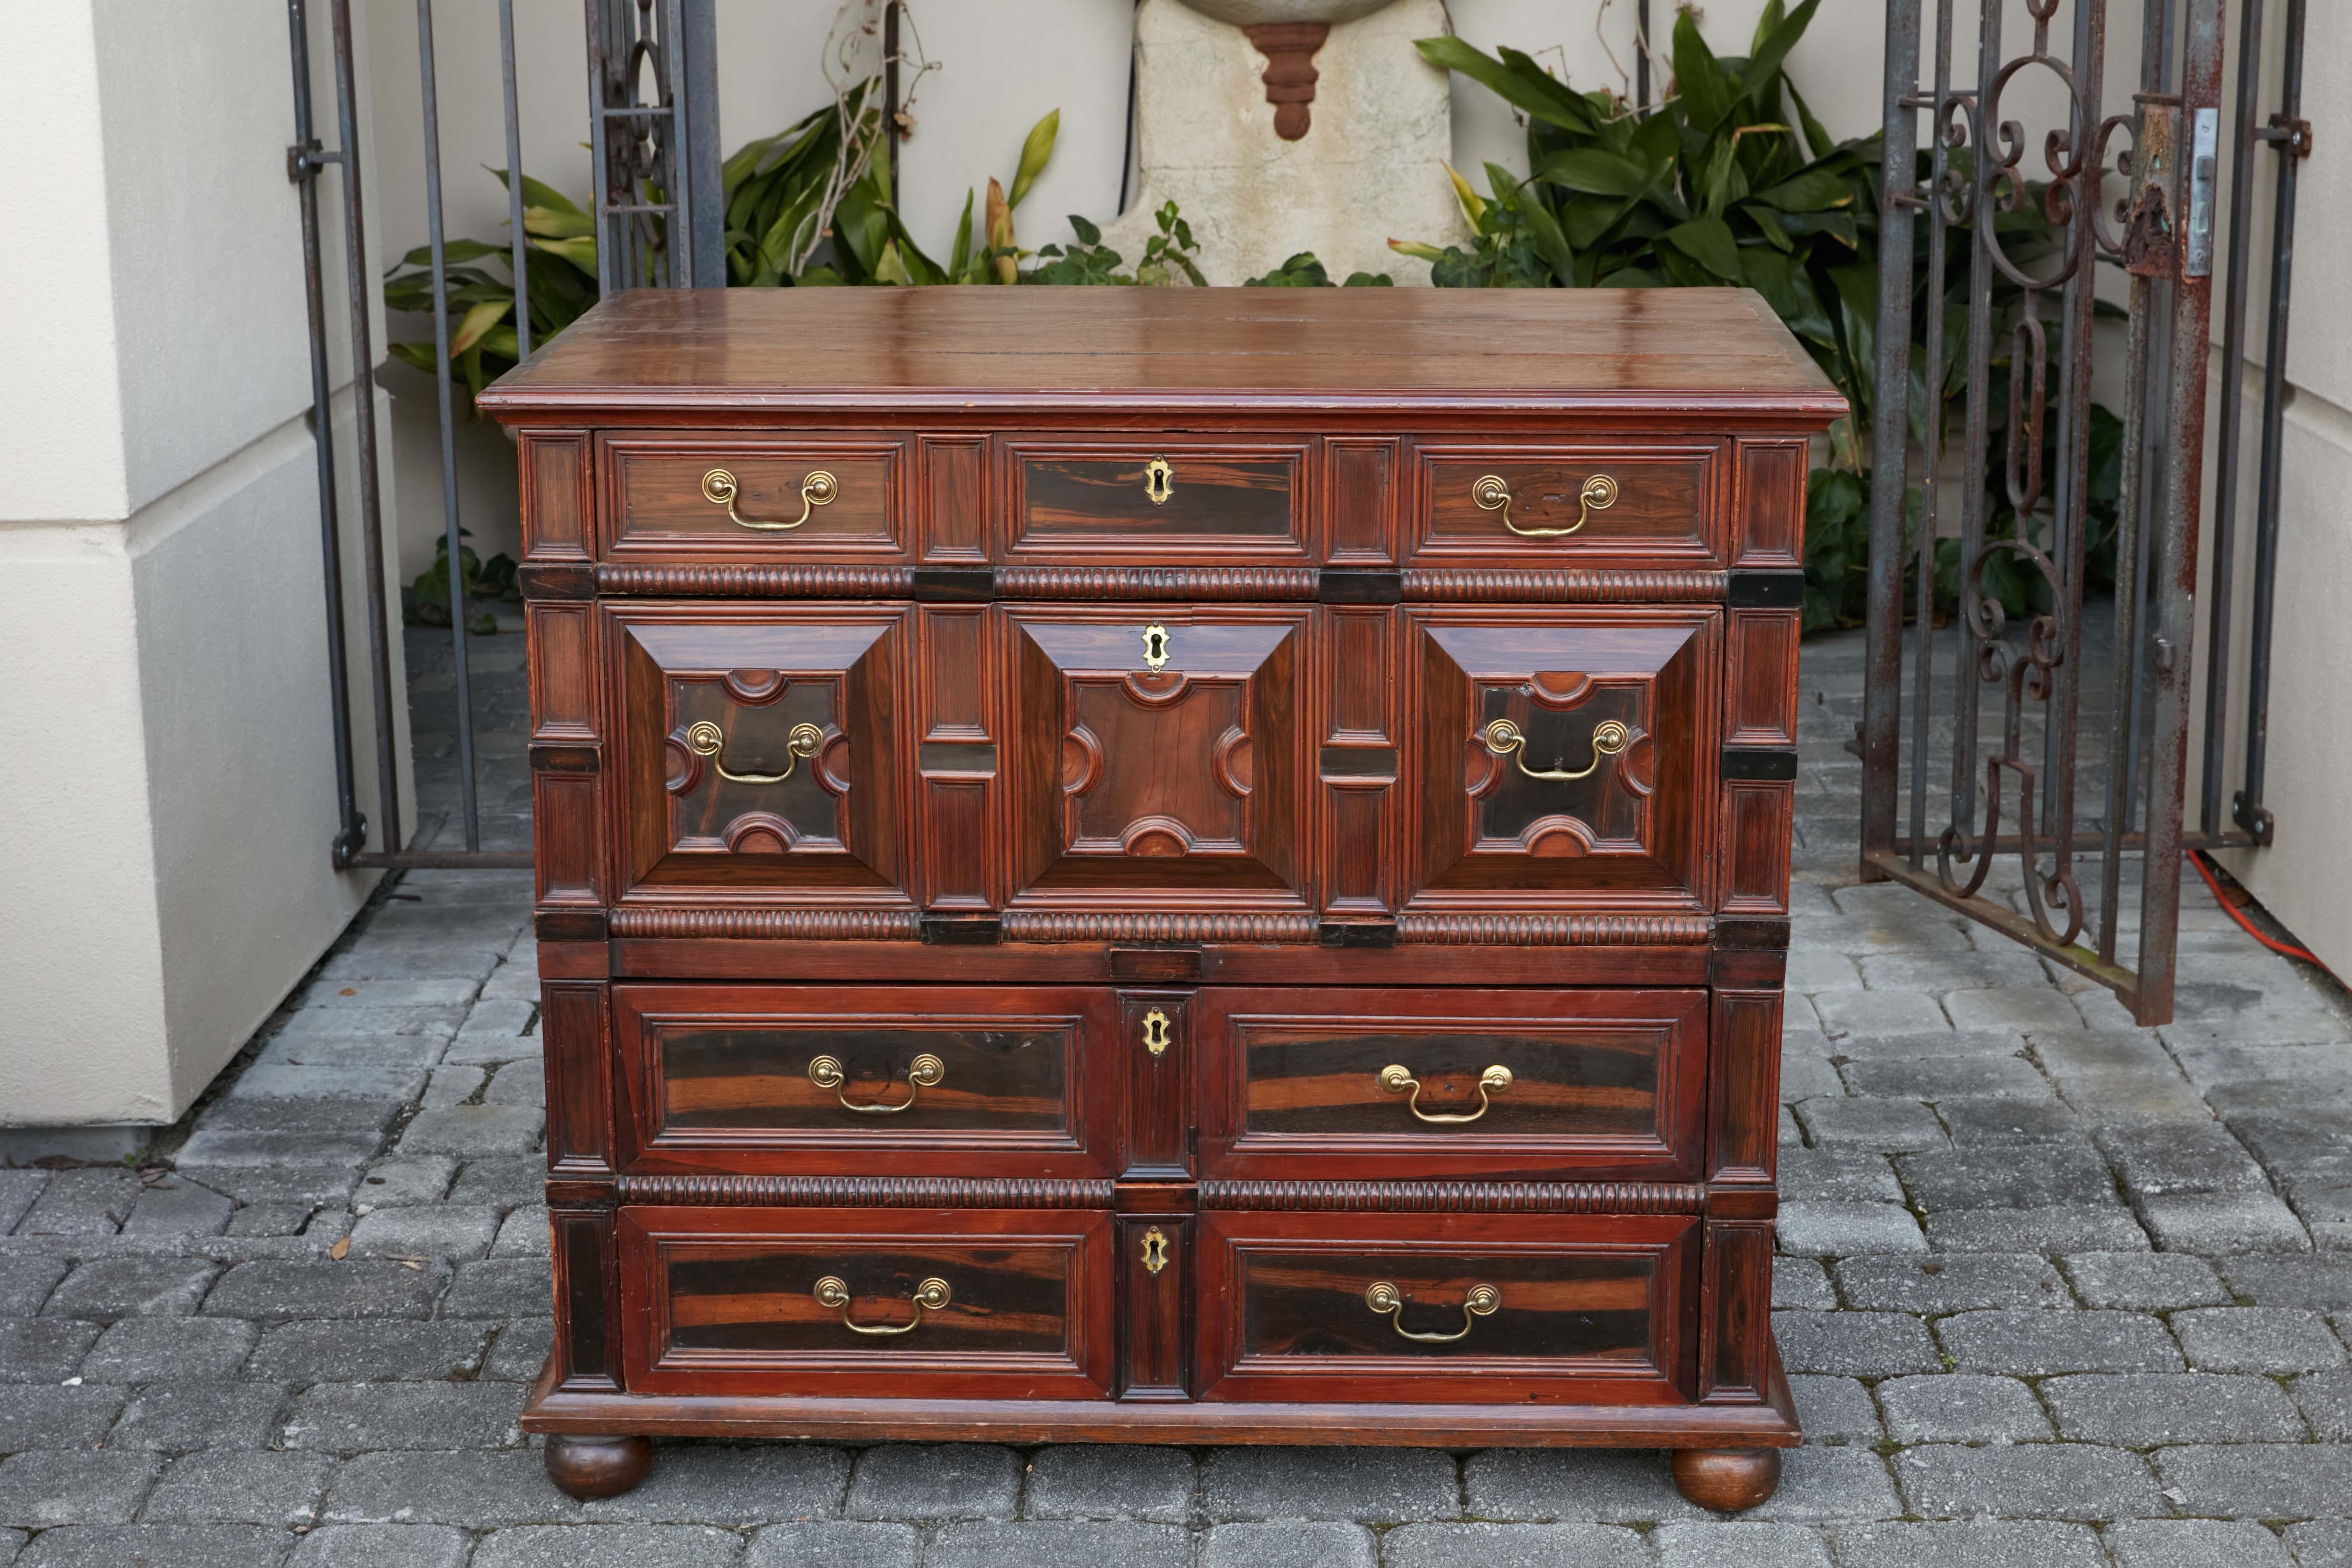 An English Georgian period geometric front four-drawer chest from the early 19th century, made of mahogany, oak and macassar ebony. Created in England during the first quarter of the 19th century, this Georgian chest features a rectangular planked